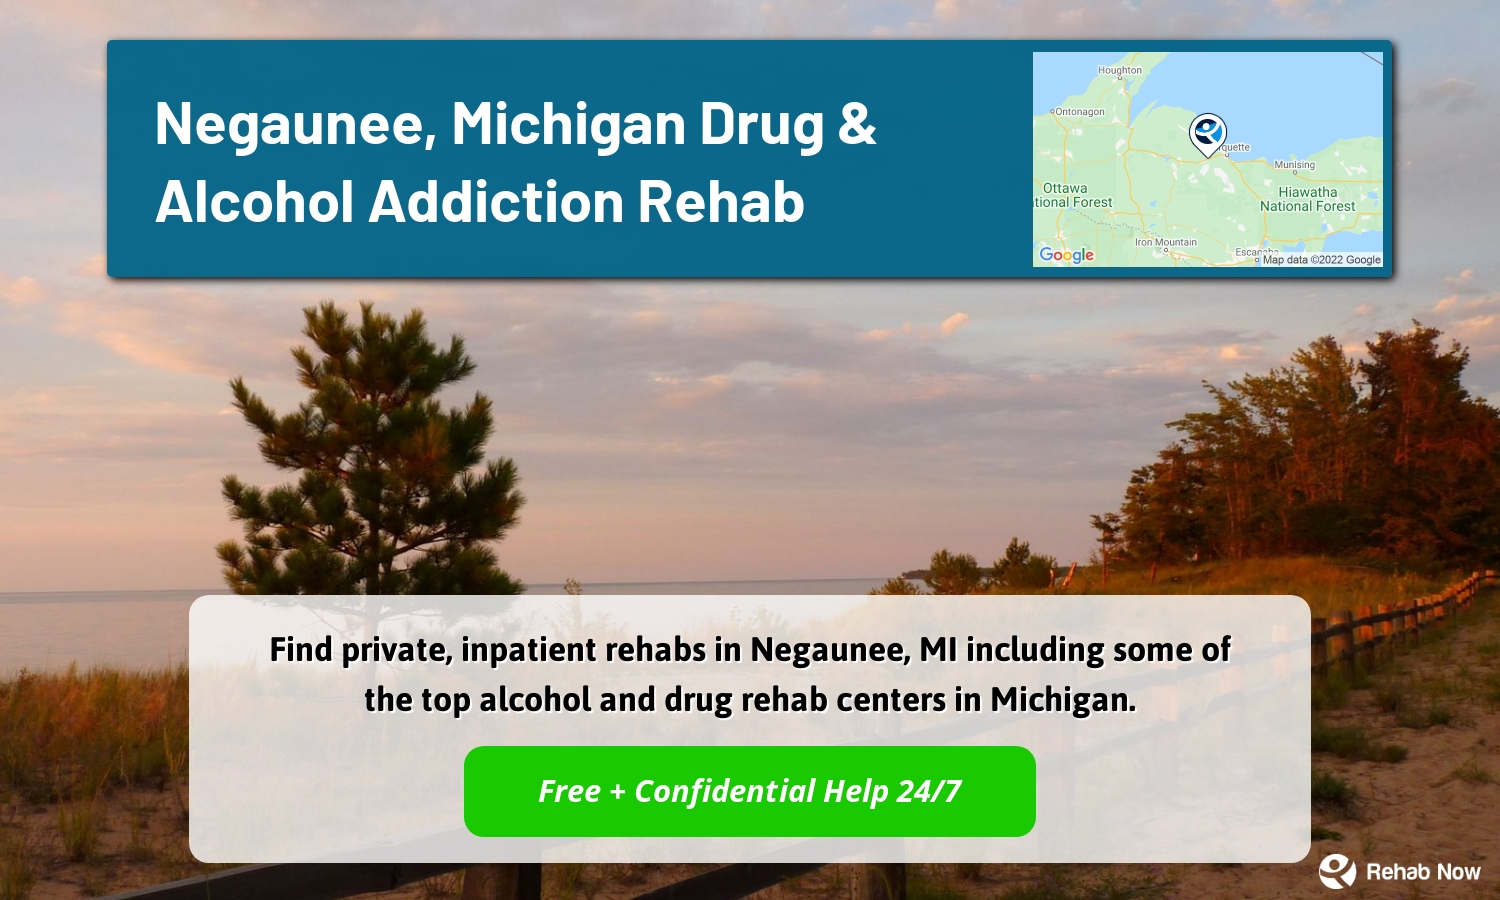 Find private, inpatient rehabs in Negaunee, MI including some of the top alcohol and drug rehab centers in Michigan.